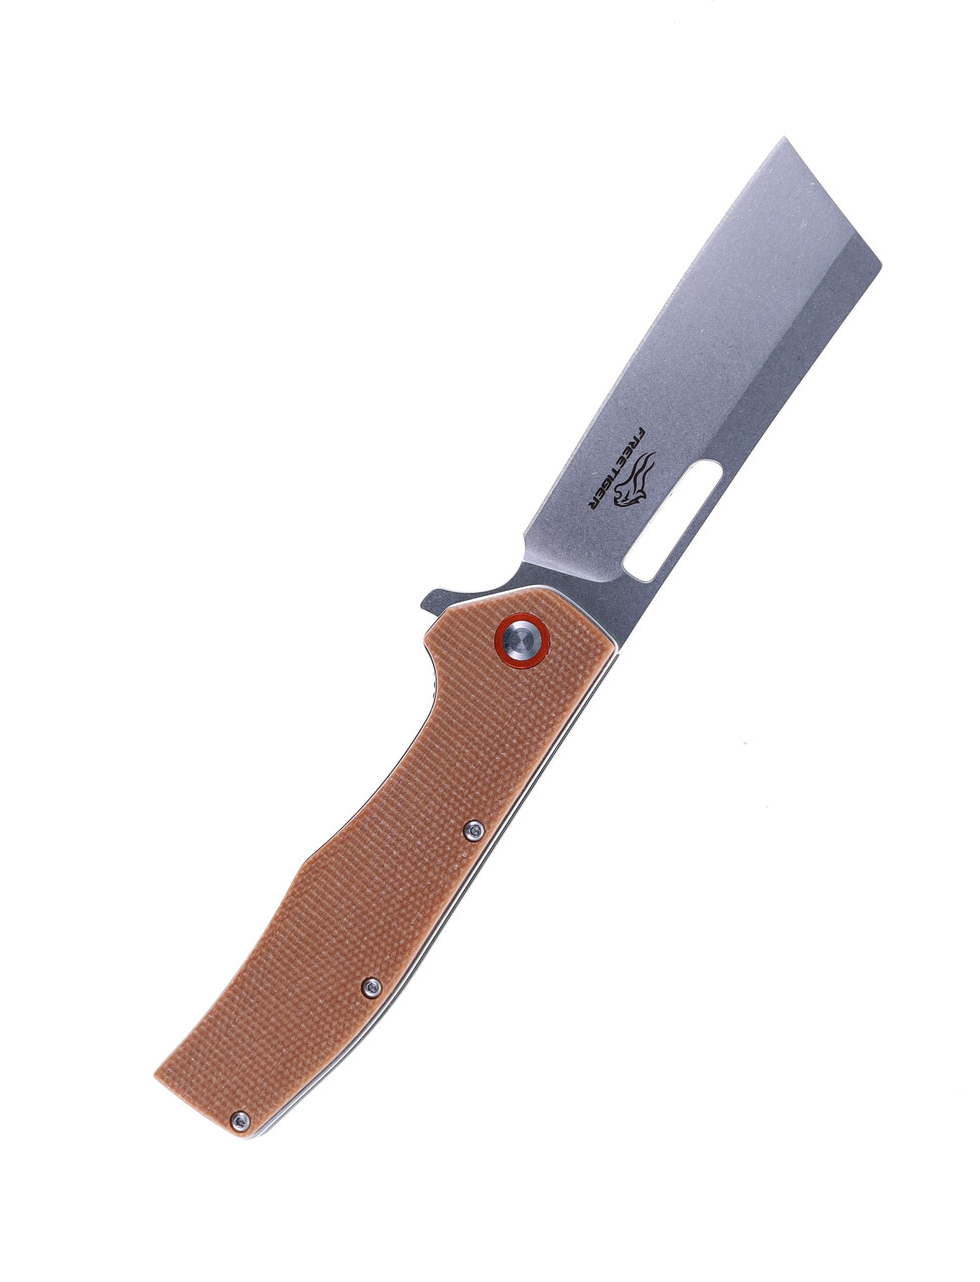 product image for Freetiger FT 955 Brown Folding Knife with Flax Fiber Handle and D2 Plain Edge Stonewash Finish